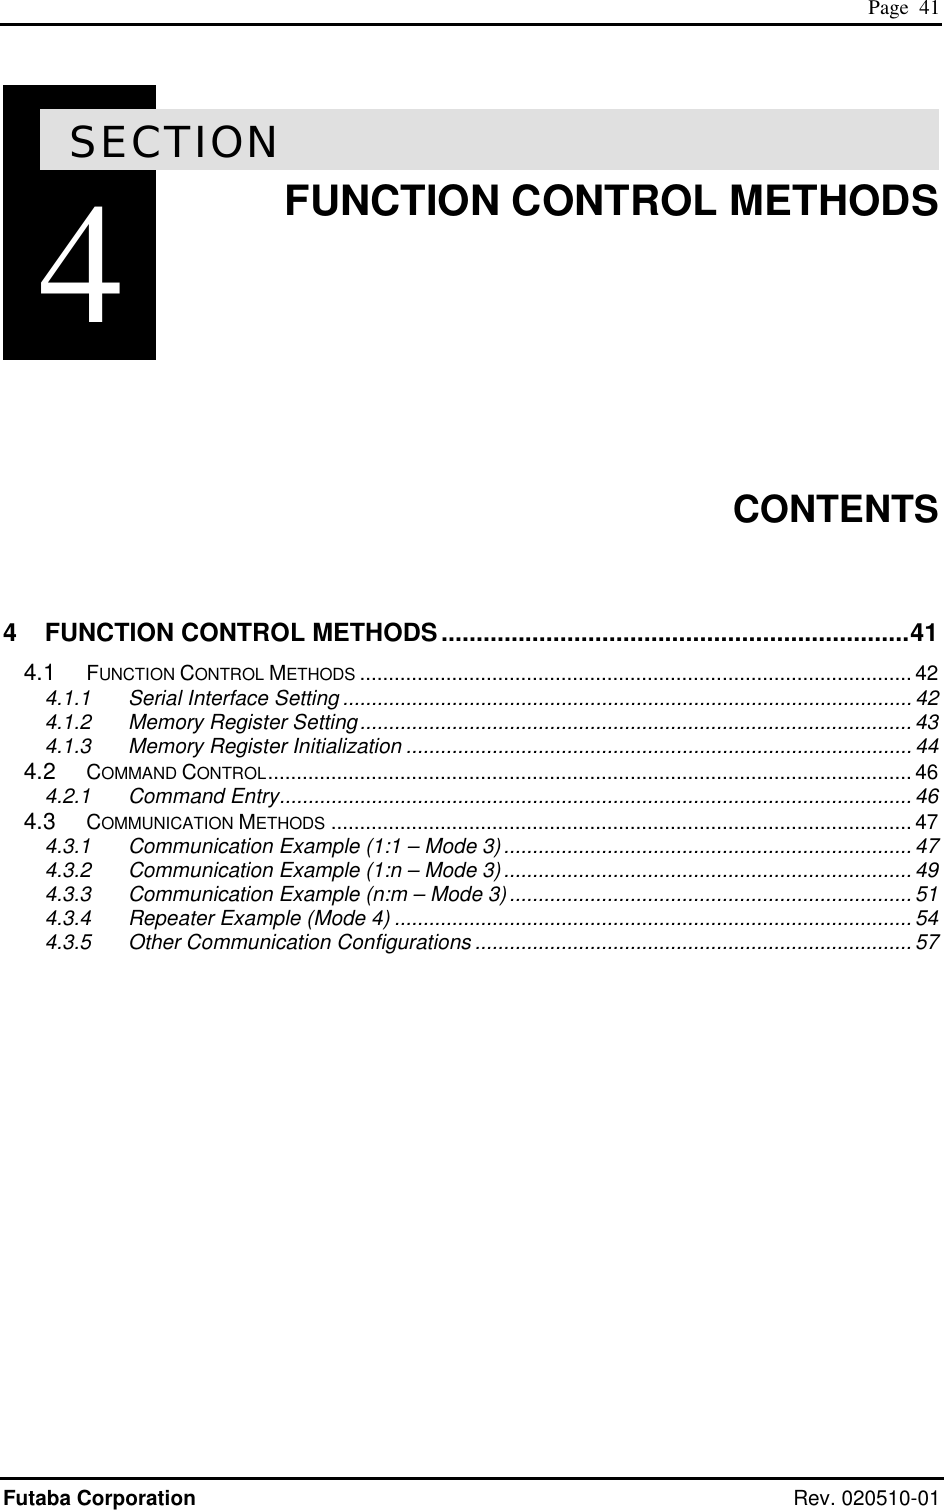  Page  41 Futaba Corporation Rev. 020510-01 4SECTION  4  FUNCTION CONTROL METHODS        CONTENTS  4 FUNCTION CONTROL METHODS...................................................................41 4.1 FUNCTION CONTROL METHODS ................................................................................................ 42 4.1.1 Serial Interface Setting ................................................................................................... 42 4.1.2 Memory Register Setting................................................................................................43 4.1.3 Memory Register Initialization ........................................................................................ 44 4.2 COMMAND CONTROL................................................................................................................ 46 4.2.1 Command Entry.............................................................................................................. 46 4.3 COMMUNICATION METHODS ..................................................................................................... 47 4.3.1 Communication Example (1:1 – Mode 3).......................................................................47 4.3.2 Communication Example (1:n – Mode 3).......................................................................49 4.3.3 Communication Example (n:m – Mode 3)......................................................................51 4.3.4 Repeater Example (Mode 4) .......................................................................................... 54 4.3.5 Other Communication Configurations ............................................................................ 57                   